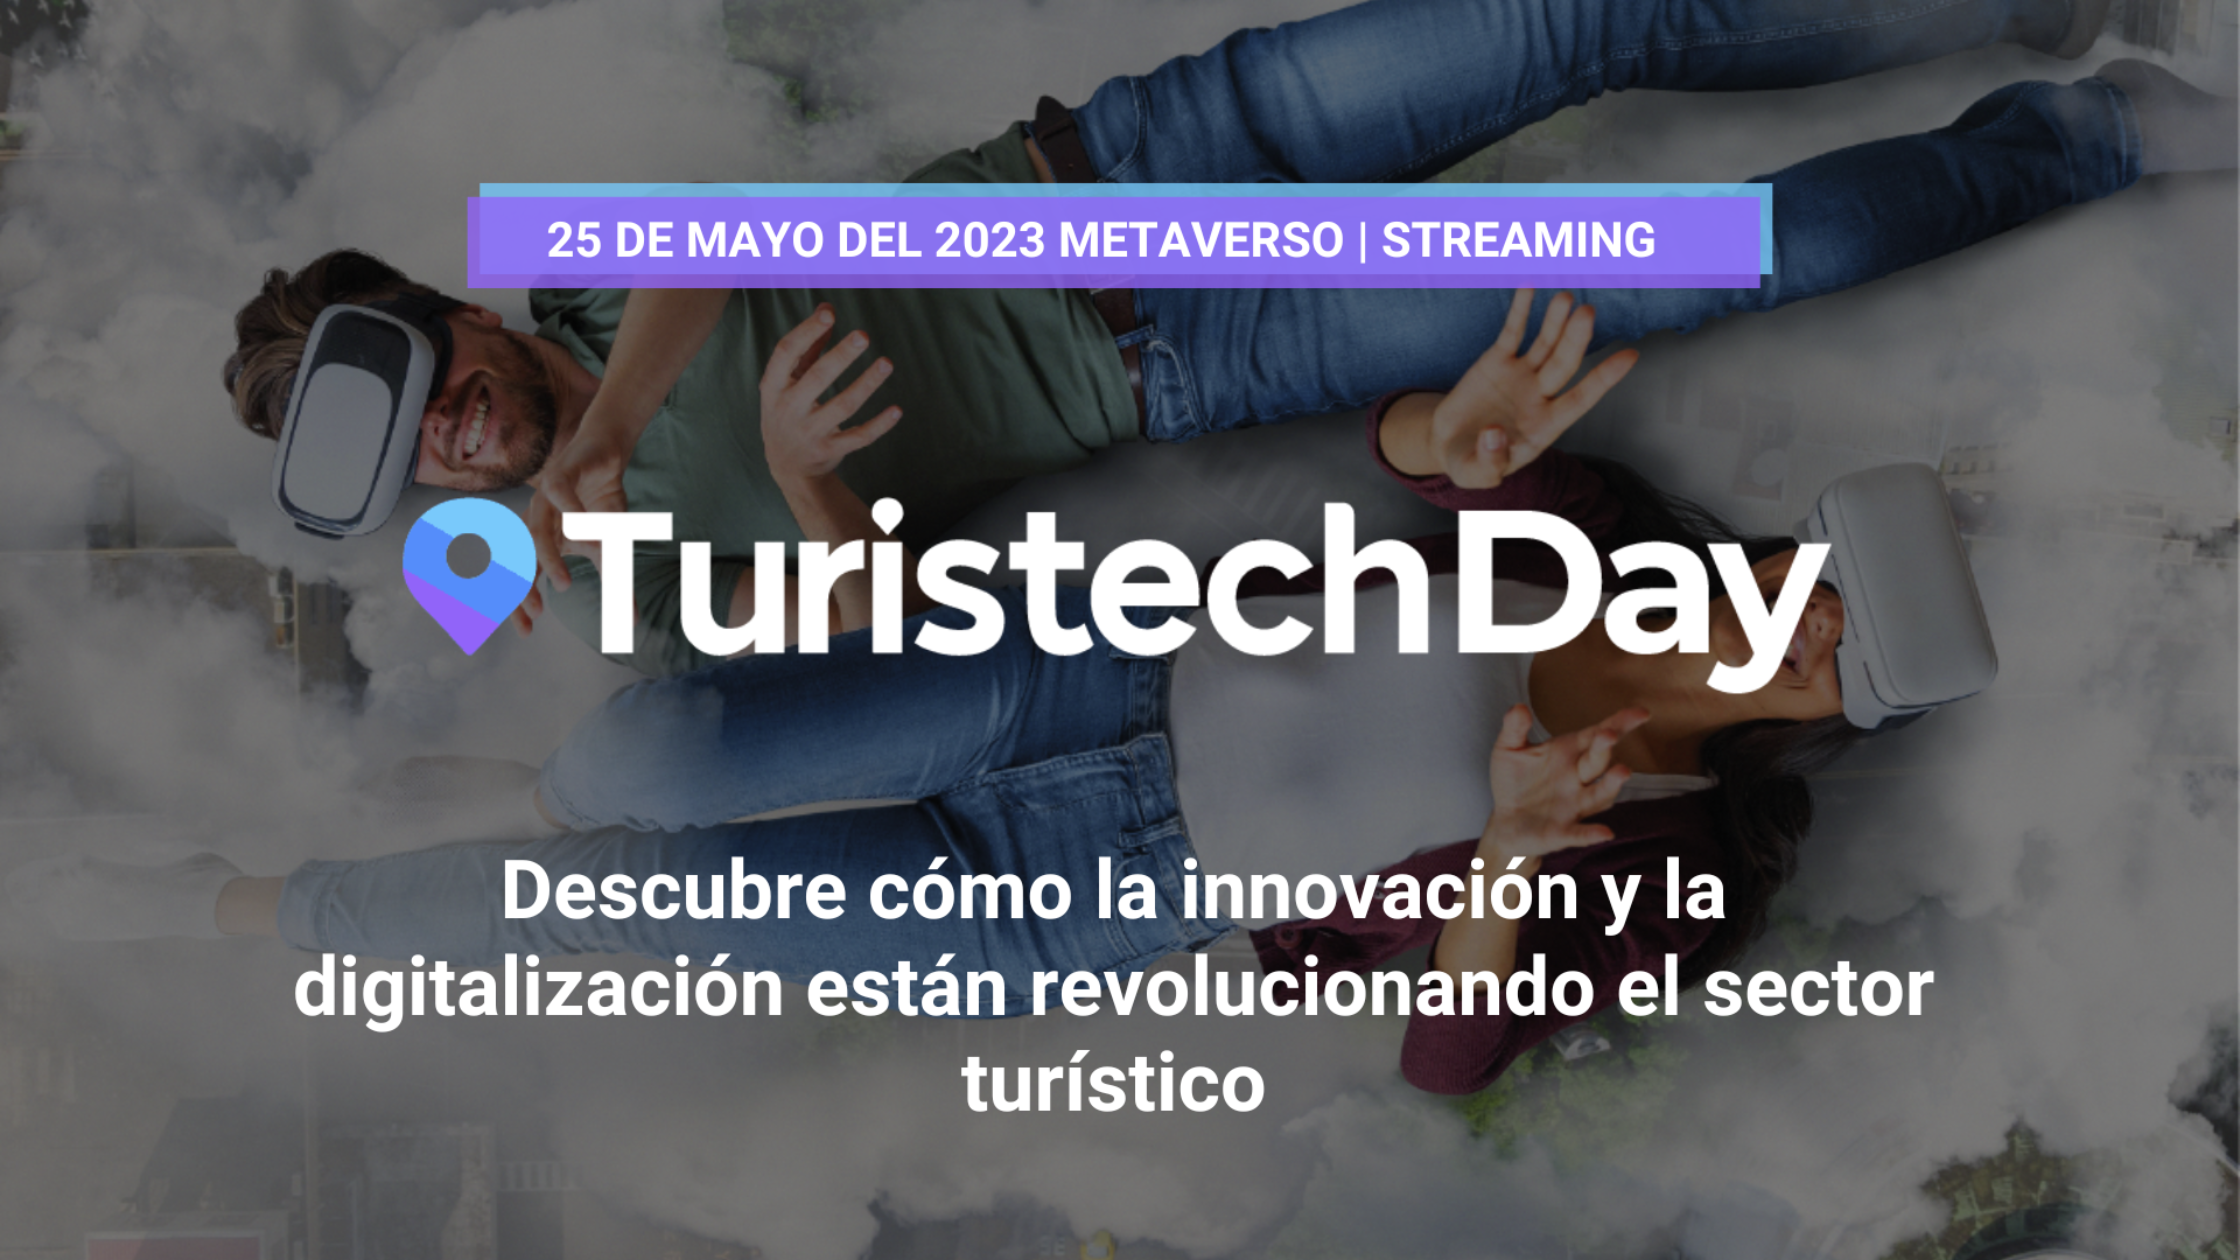 Turistech Day will present the latest trends in technology applied to tourism